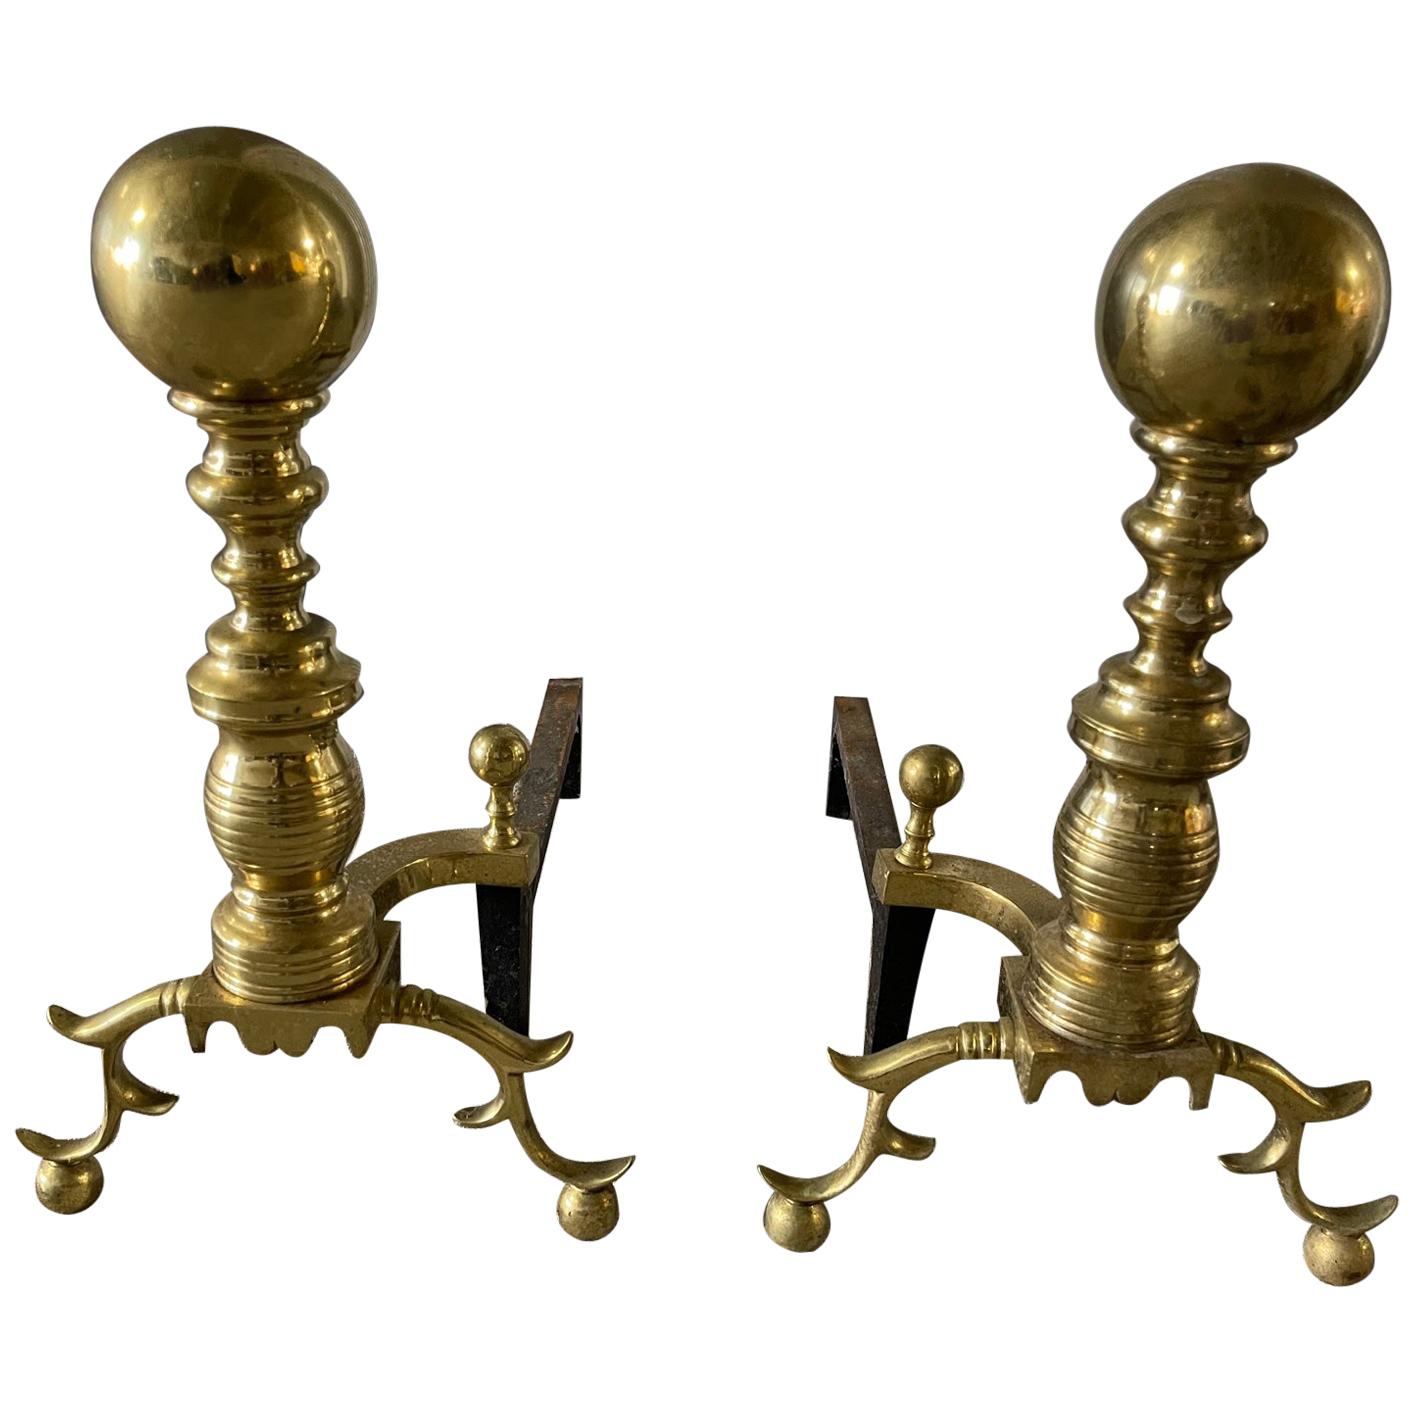 Pair of Brass Andirons with a Decorative Ball at Top and Feet, 19th Century